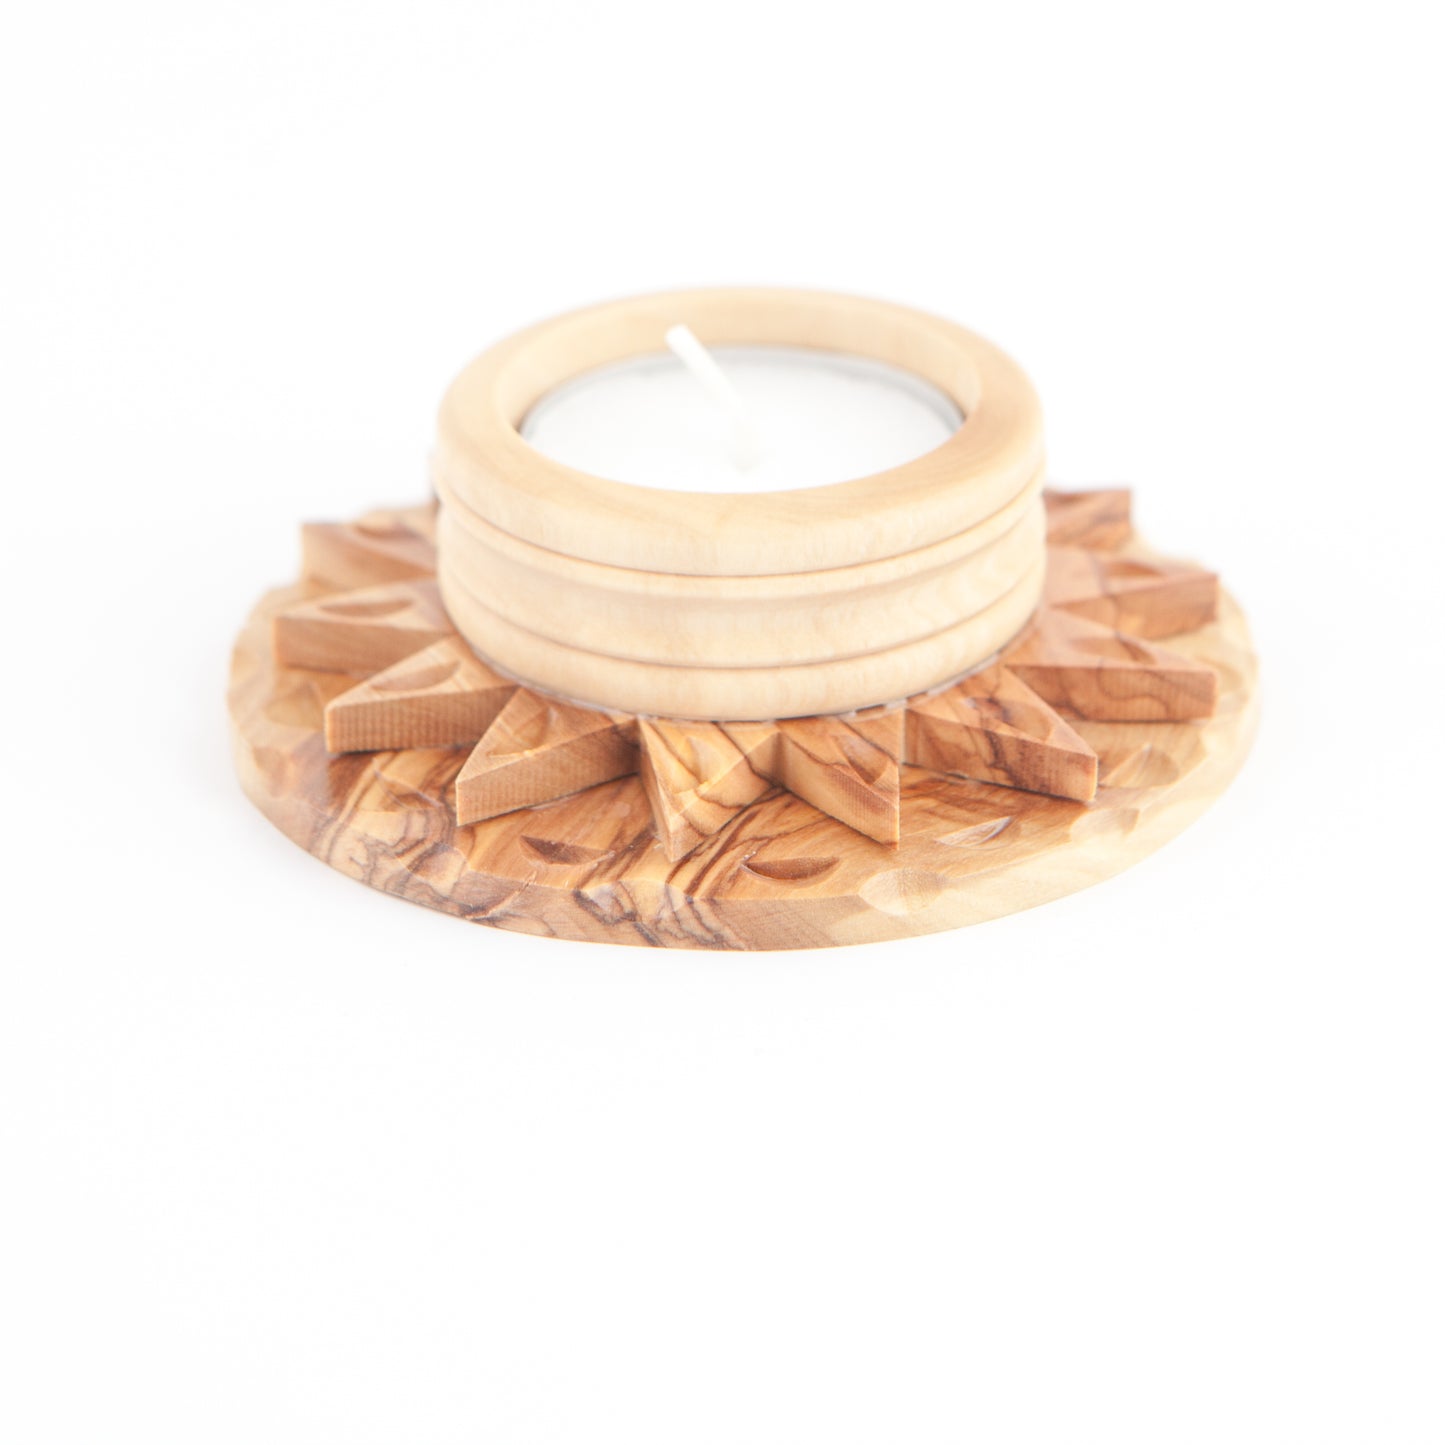 Wooden Candle Holder With A Star